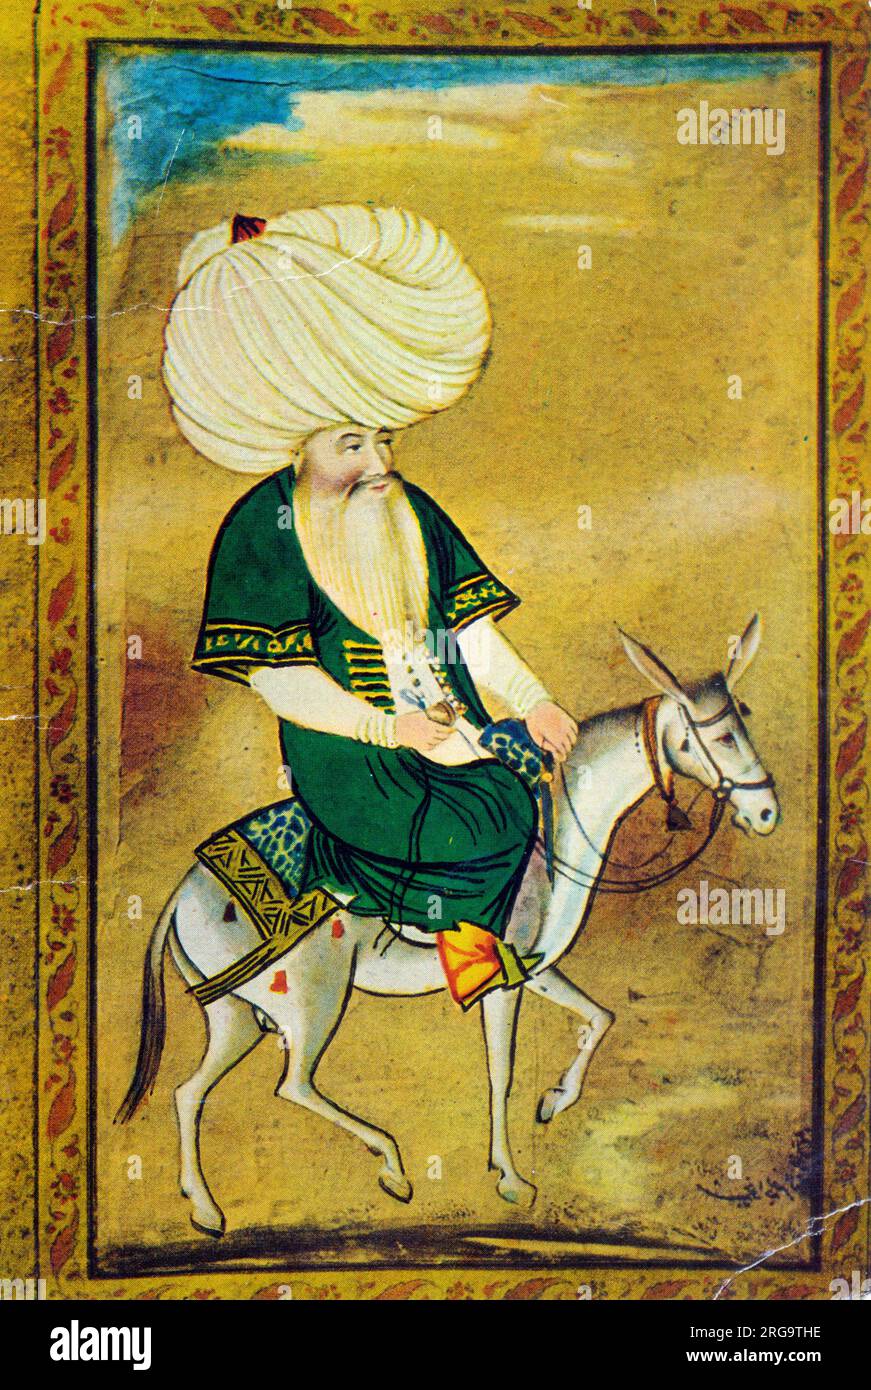 Nasreddin or Nasreddin Hodja or Mullah Nasreddin Hooja or Mullah Nasruddin (1208-1284) was a Seljuq satirist, born in Hortu Village in Sivrihisar, Eskisehir Province, Turkey. Considered a philosopher, Sufi, and wise man, remembered for his funny stories and anecdotes. Stock Photo